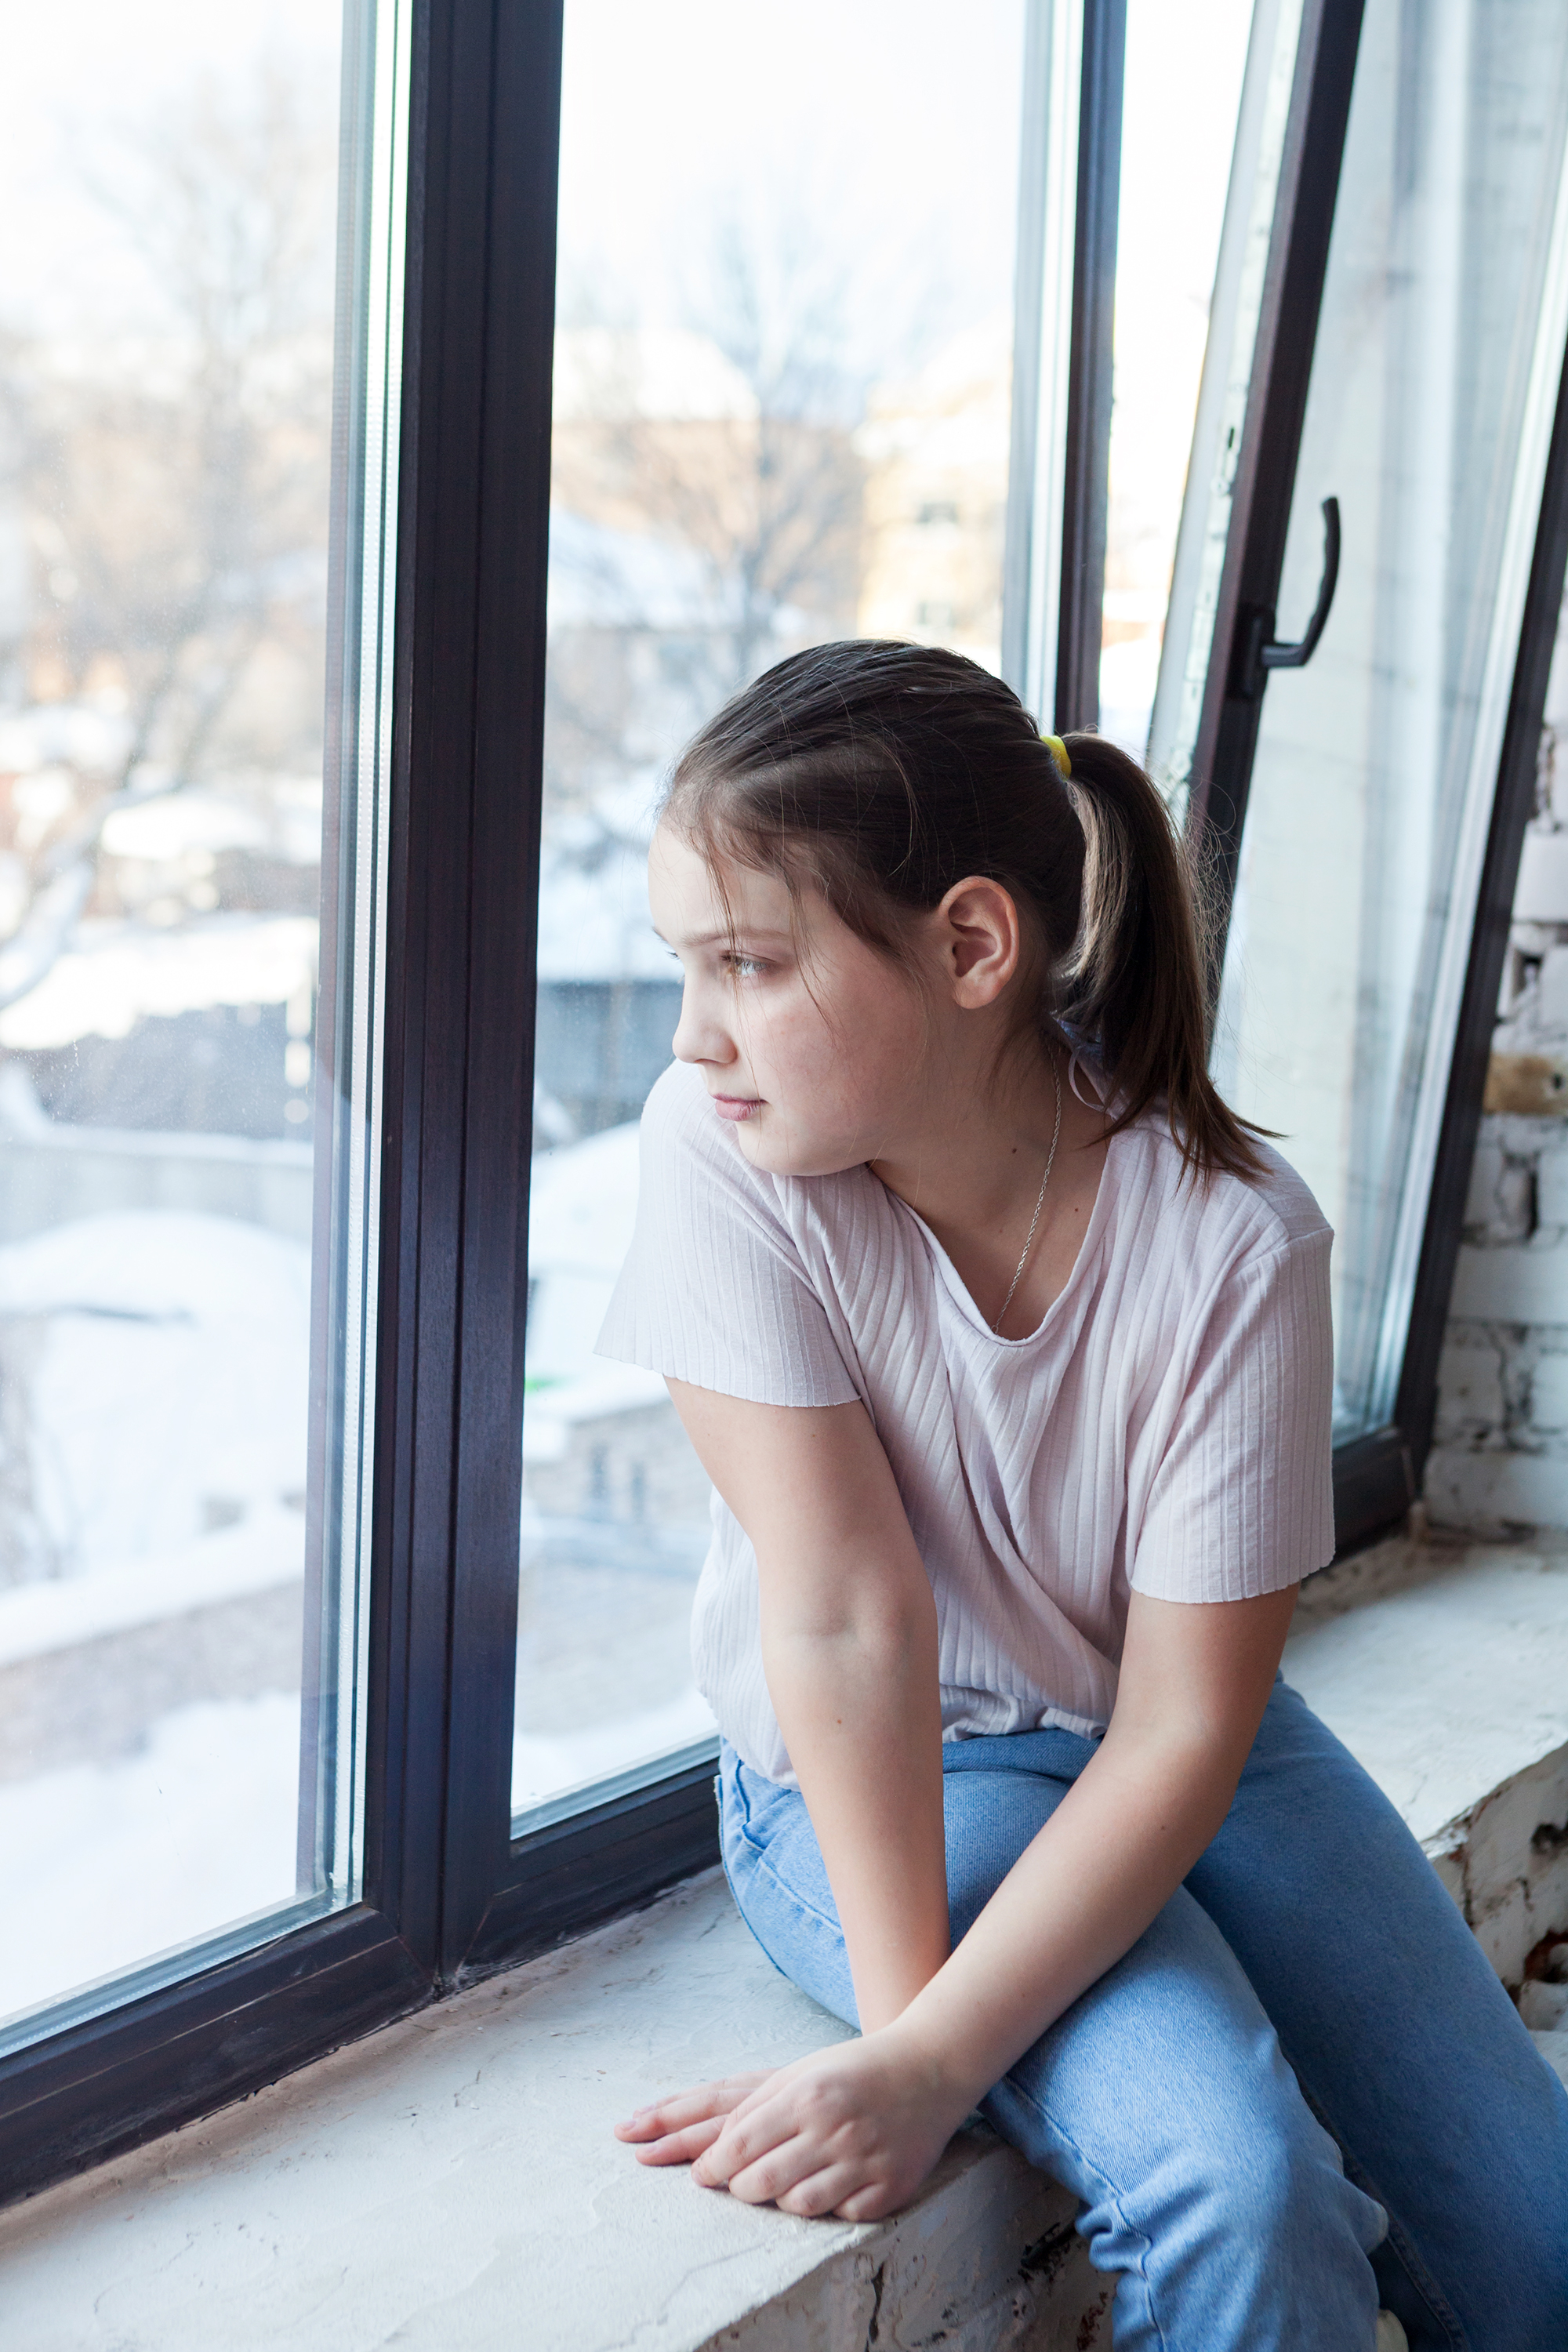 Young girl looking out the window | Source: Shutterstock